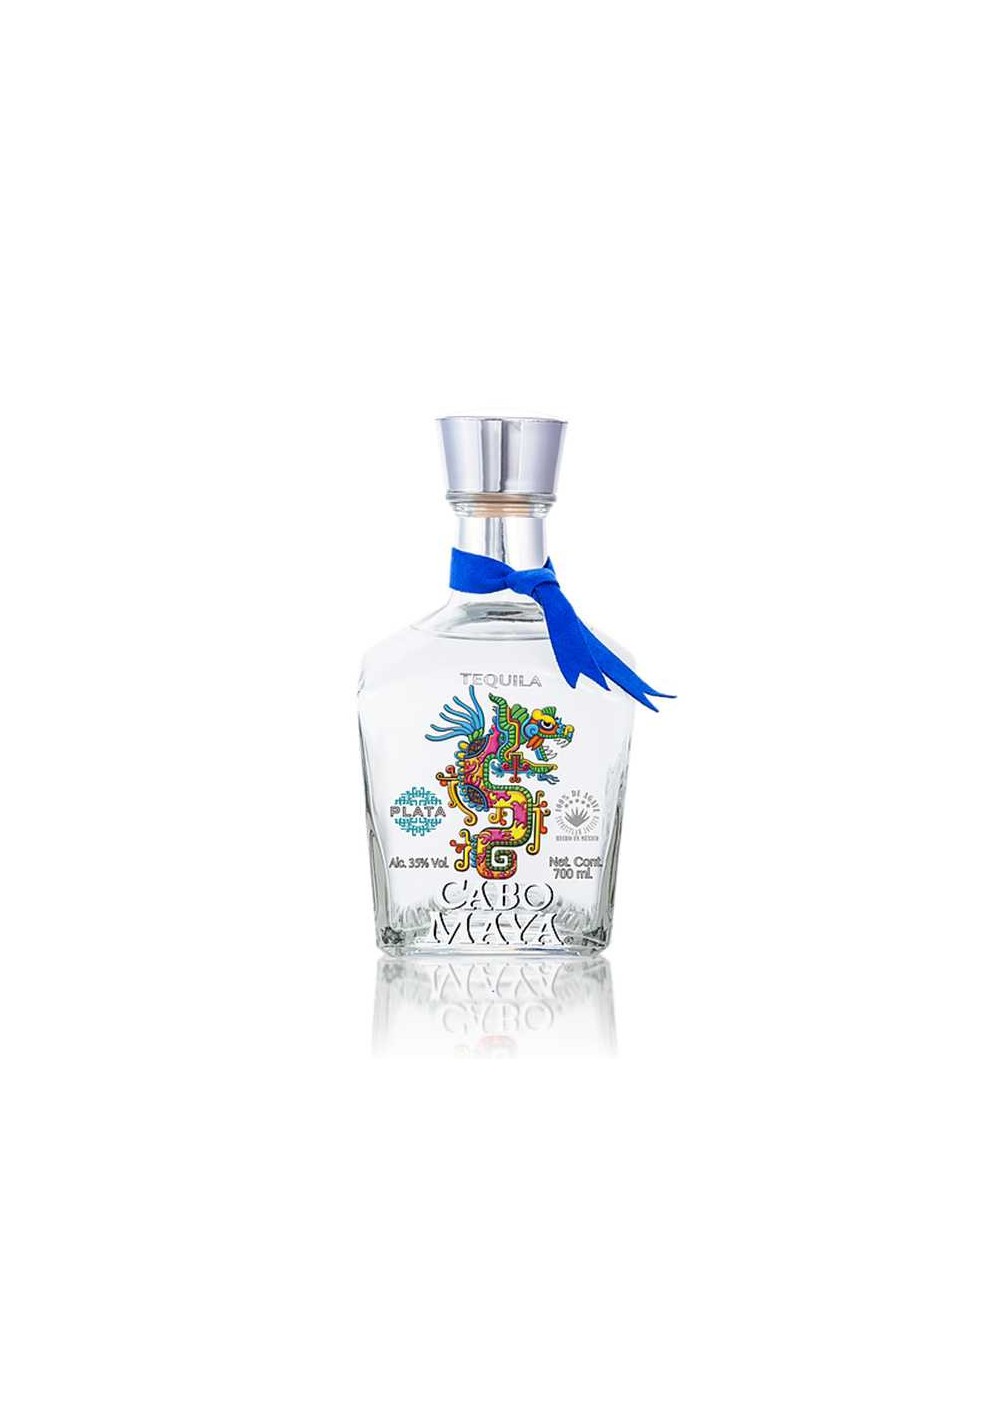 Cabo Maya - Tequila Plata - (70cl)